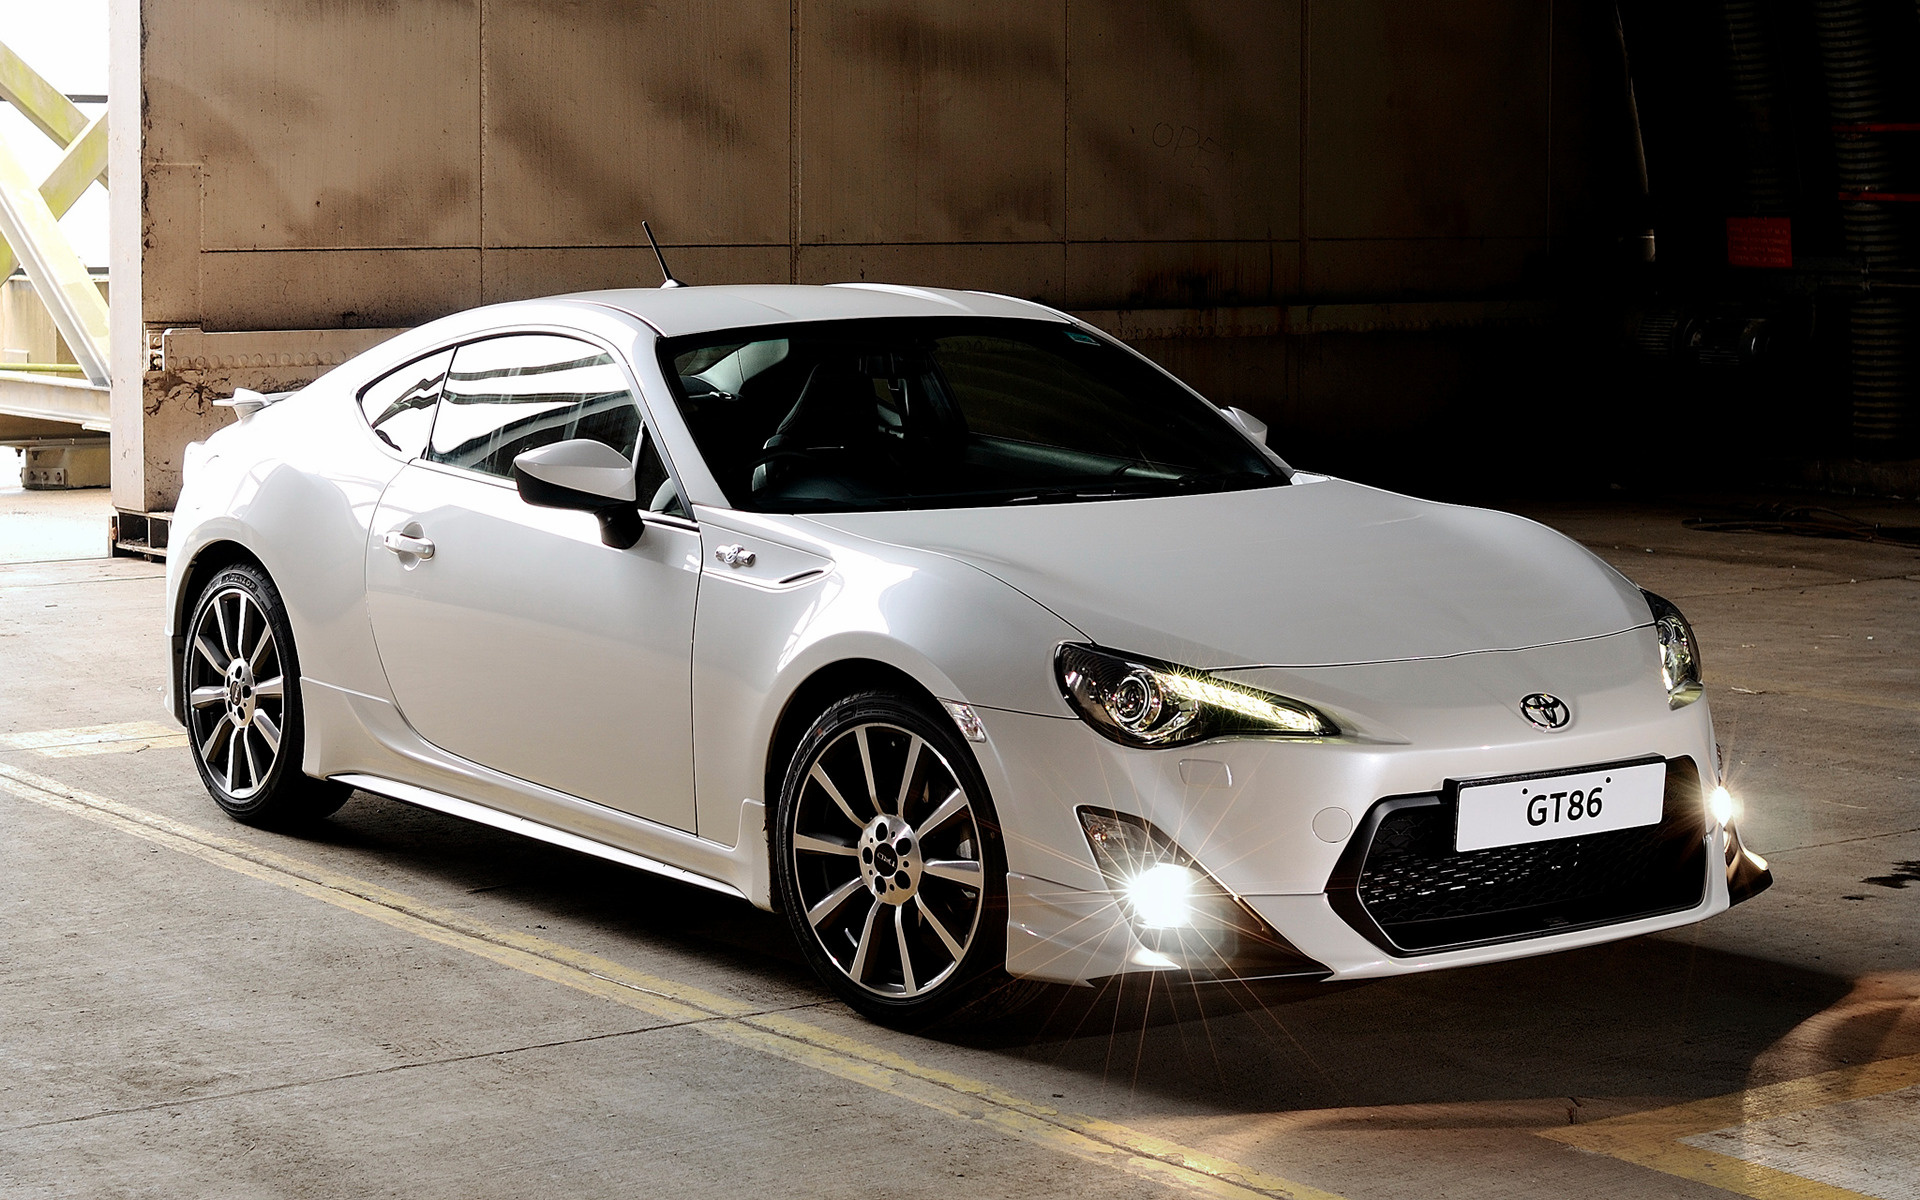 TRD Toyota GT 86 (UK) and HD Image